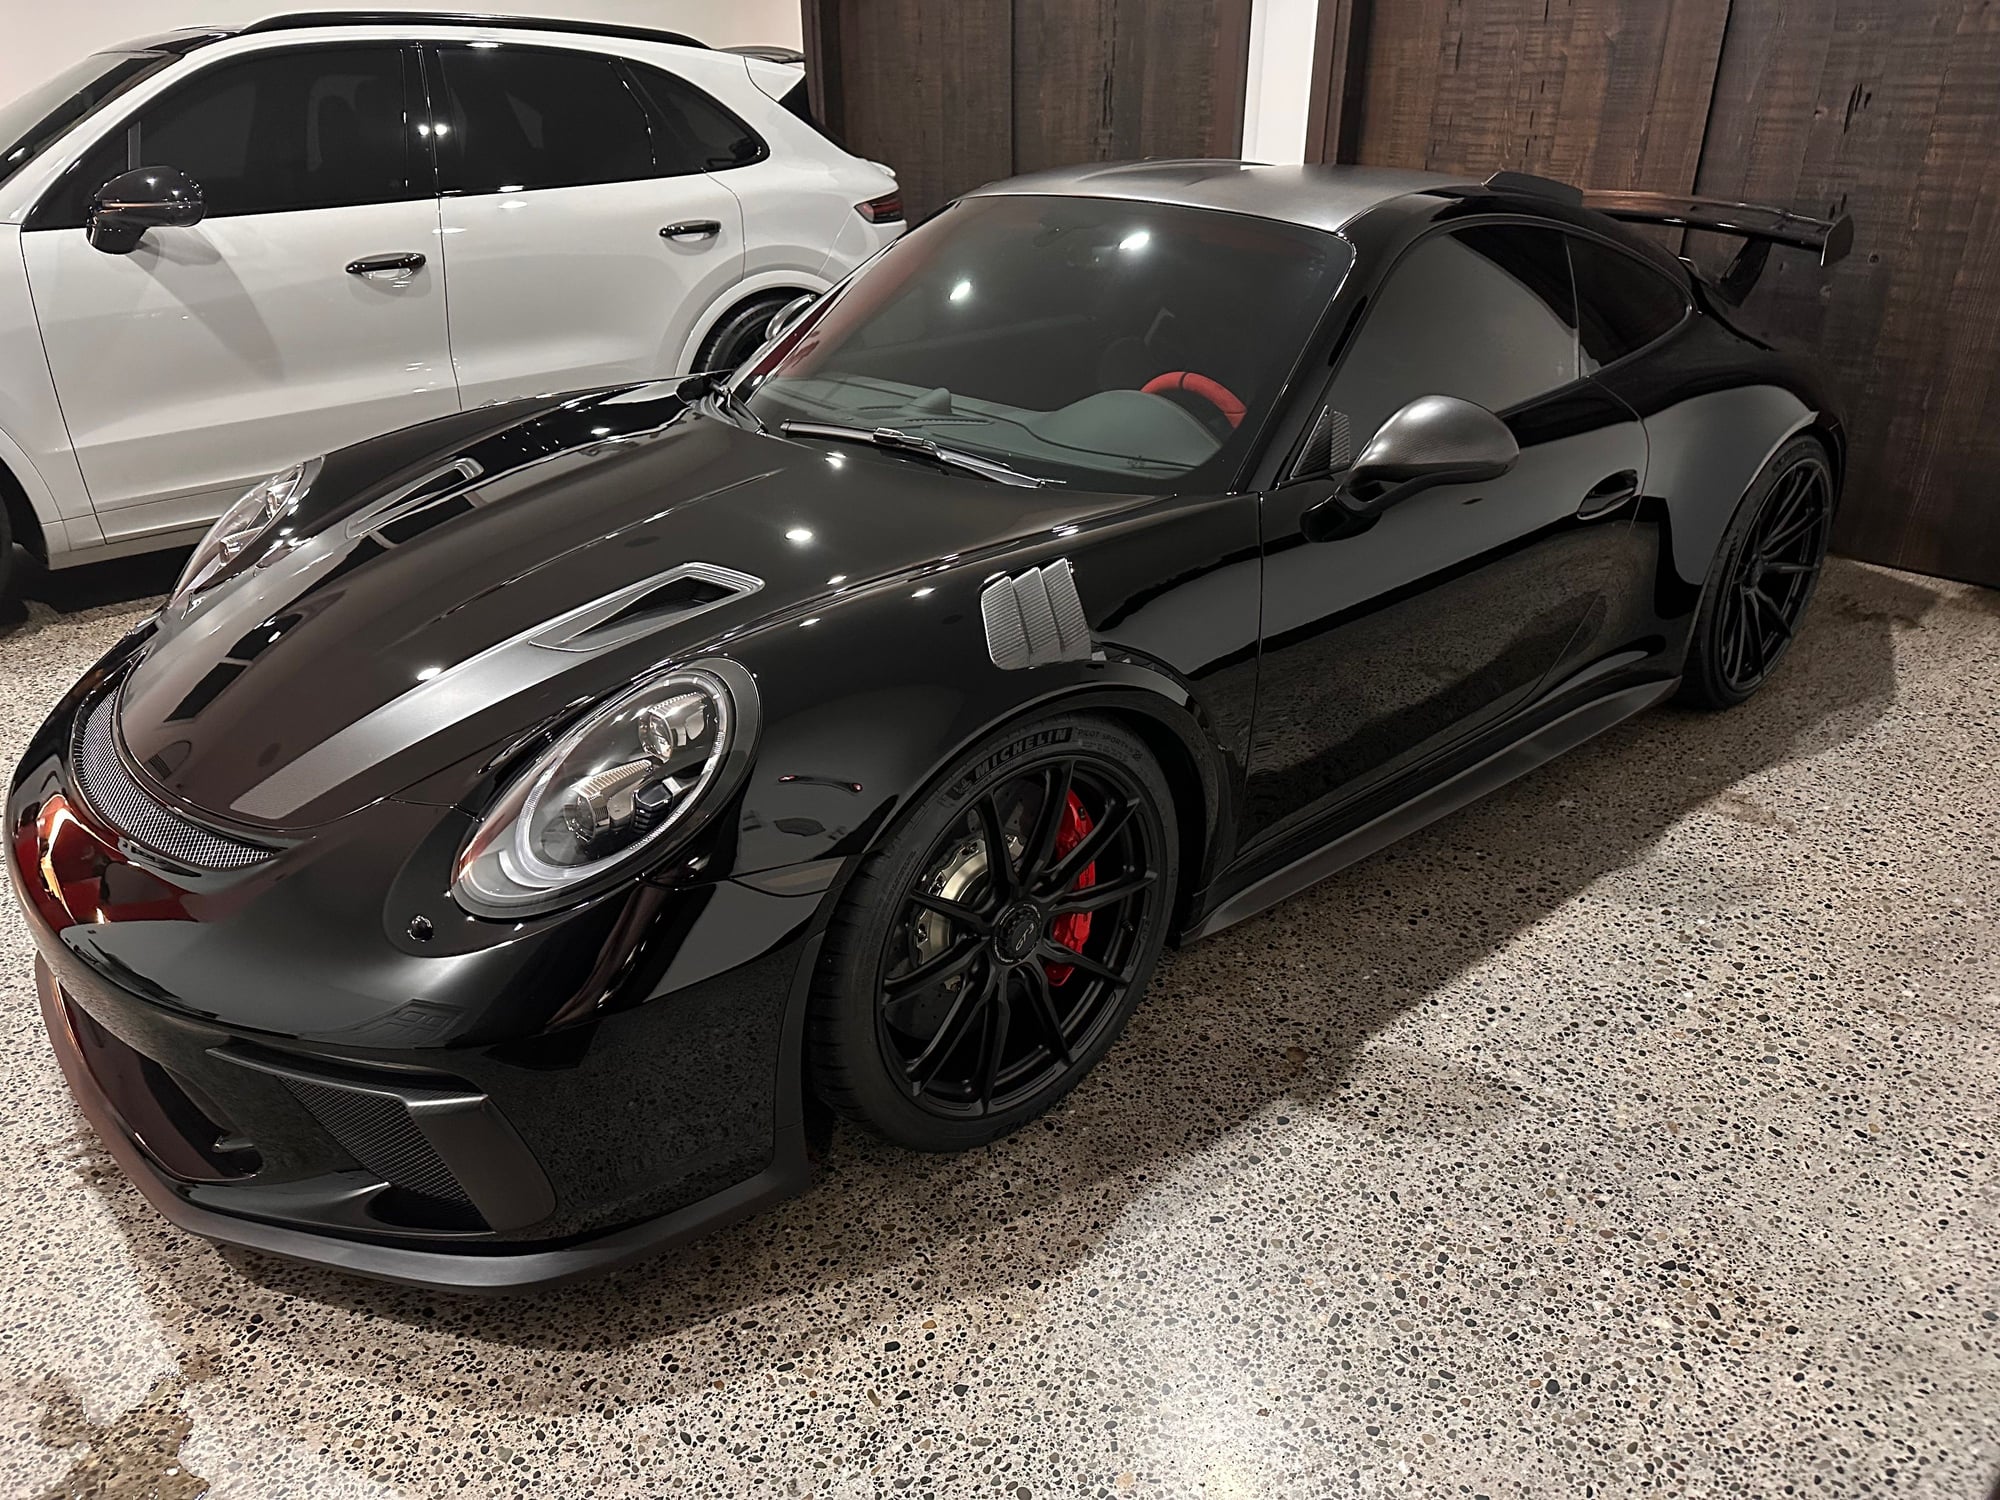 2019 Porsche GT3 - Wicked Motor Works Carbon Fiber RS Fenders - Exterior Body Parts - $5,000 - Gig Harbor, WA 98335, United States